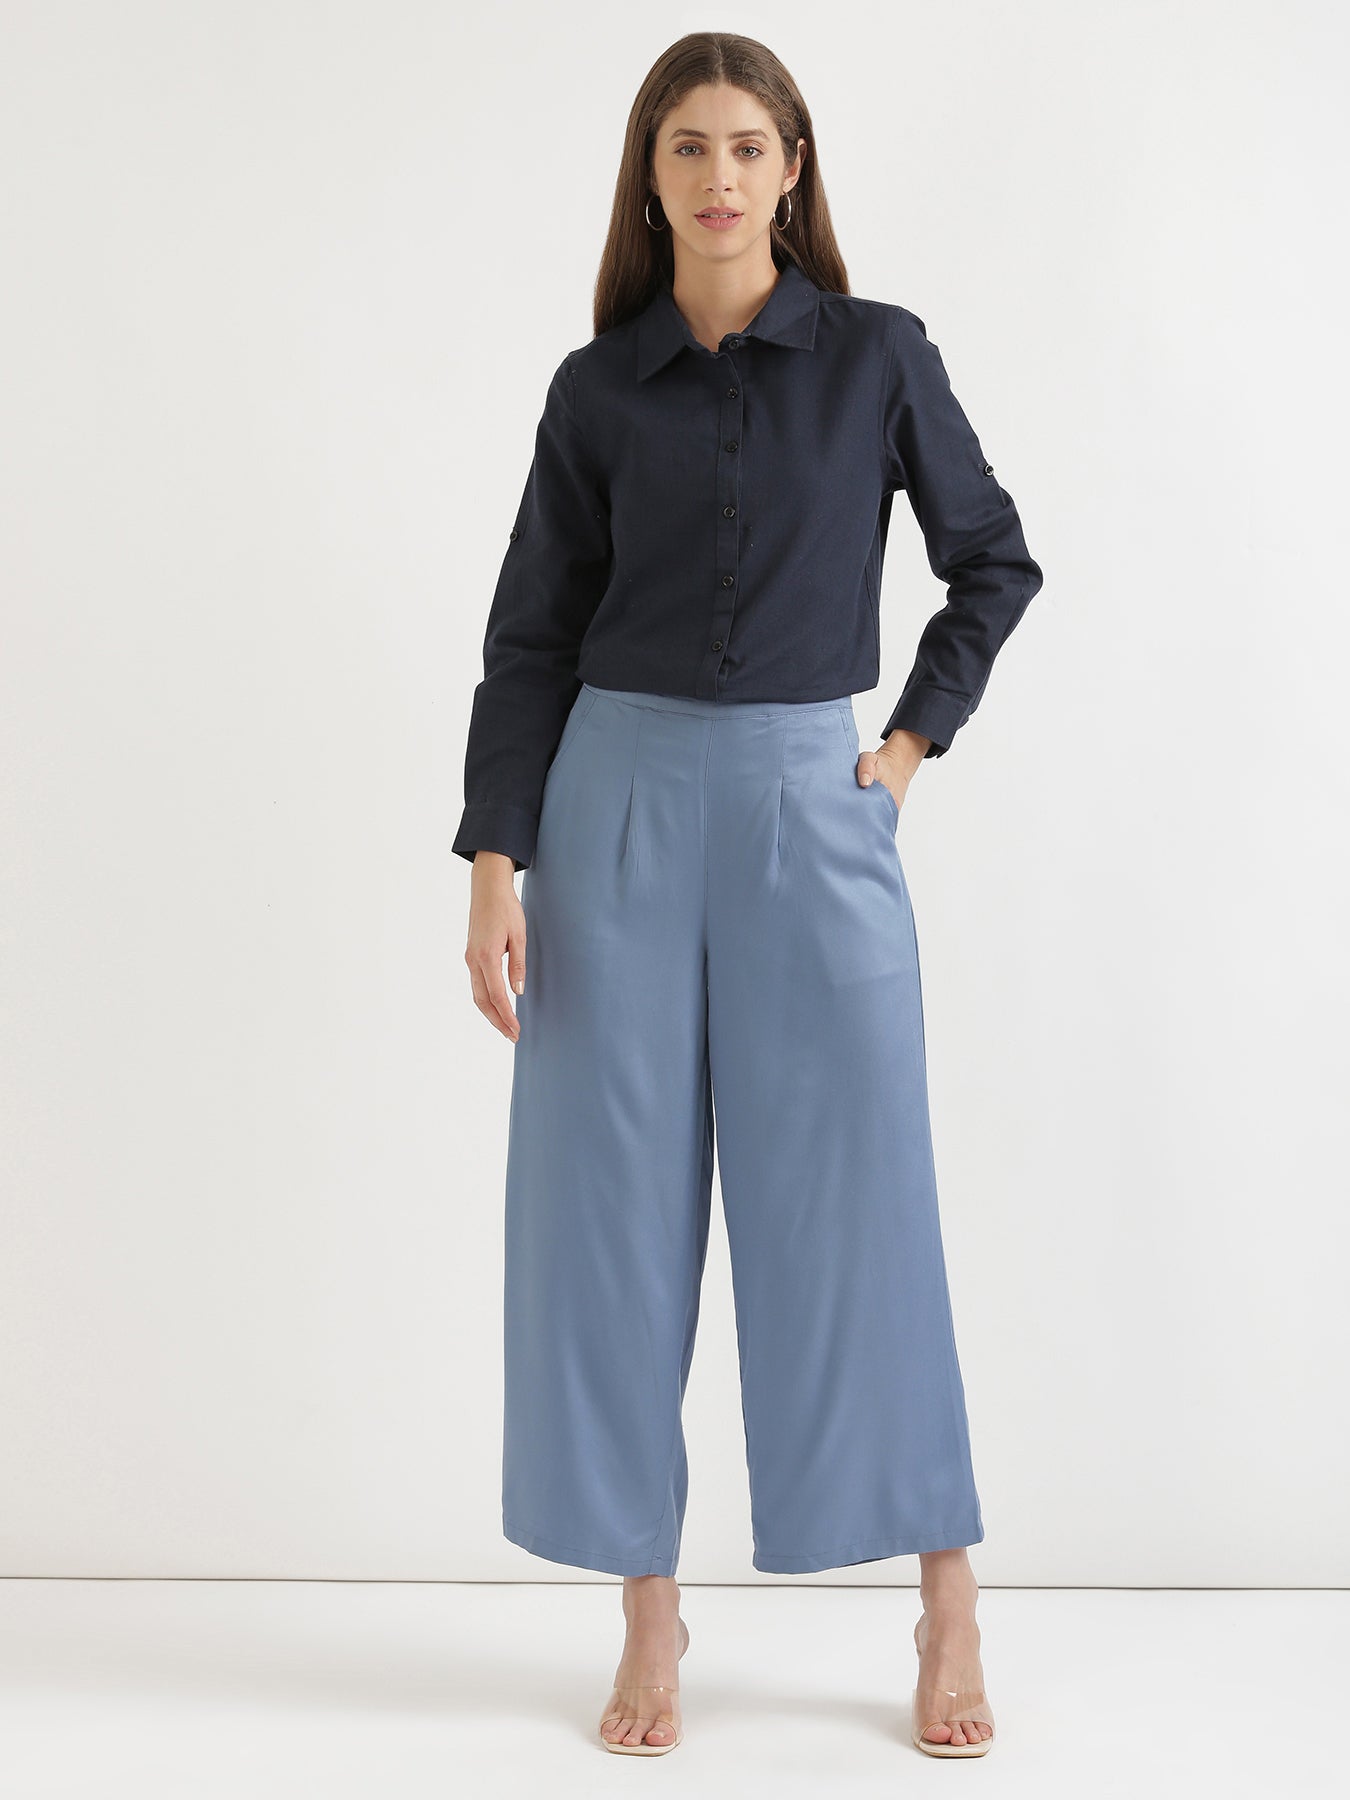 💙 Ink Blue Palazzo Pants 🌍 Visit our website to place the order #palazzo # palazzopants #palazzomurah #fashion #blouse #kurti #dress… | Instagram